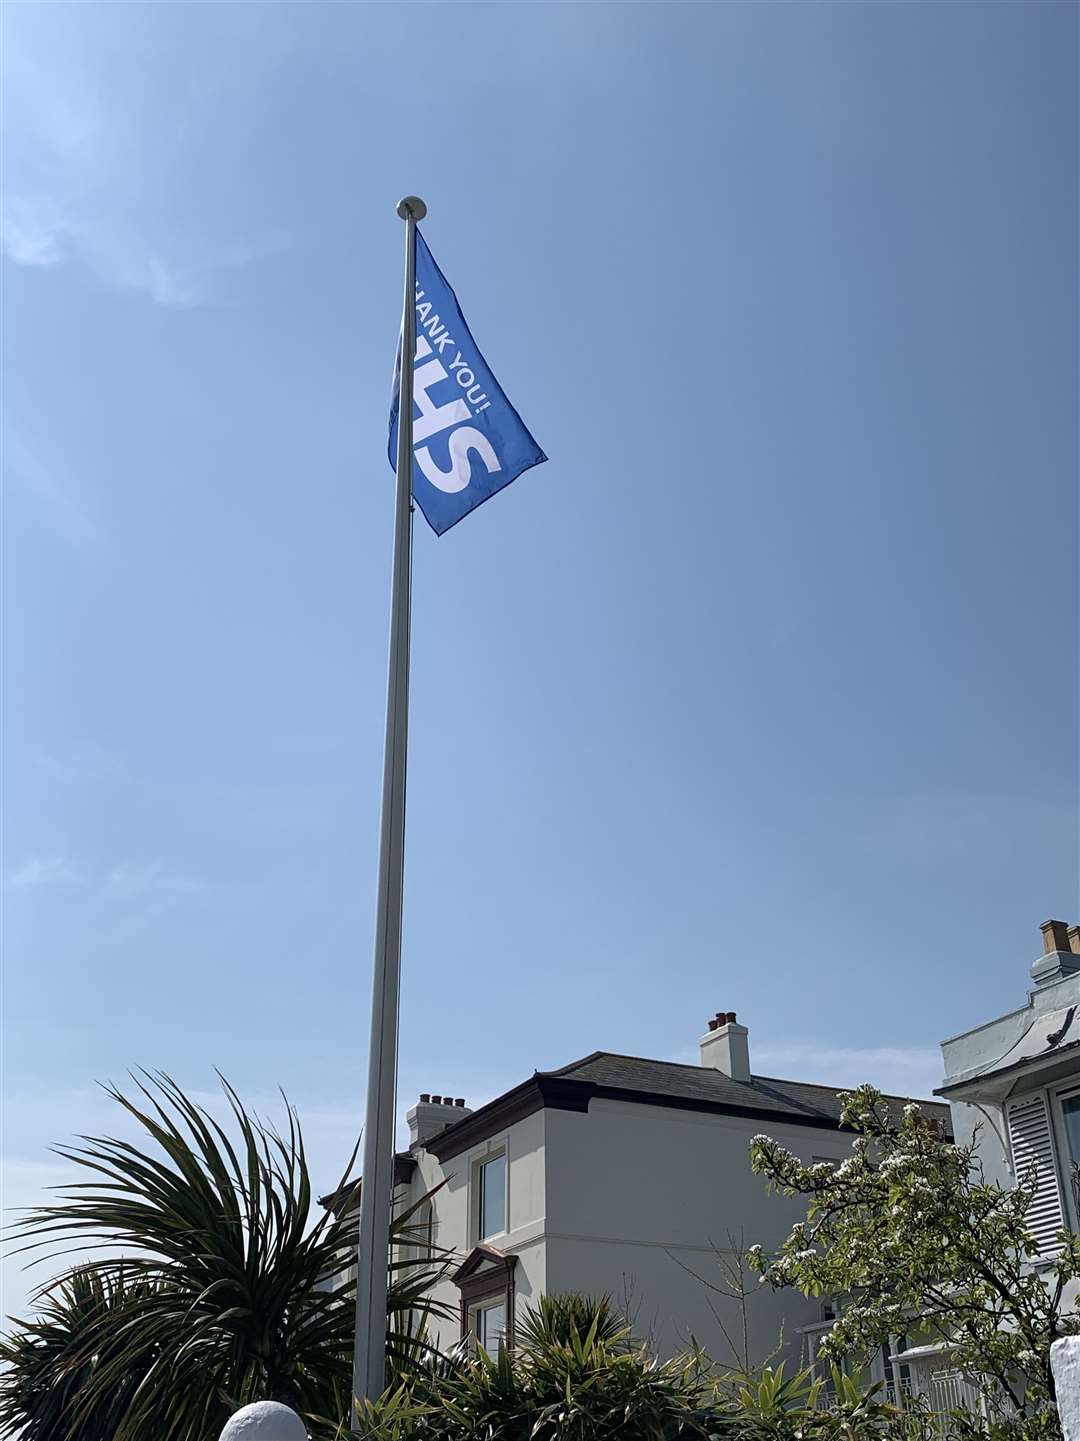 'Thank you NHS' is the message on a flag being flown in a seafront garden